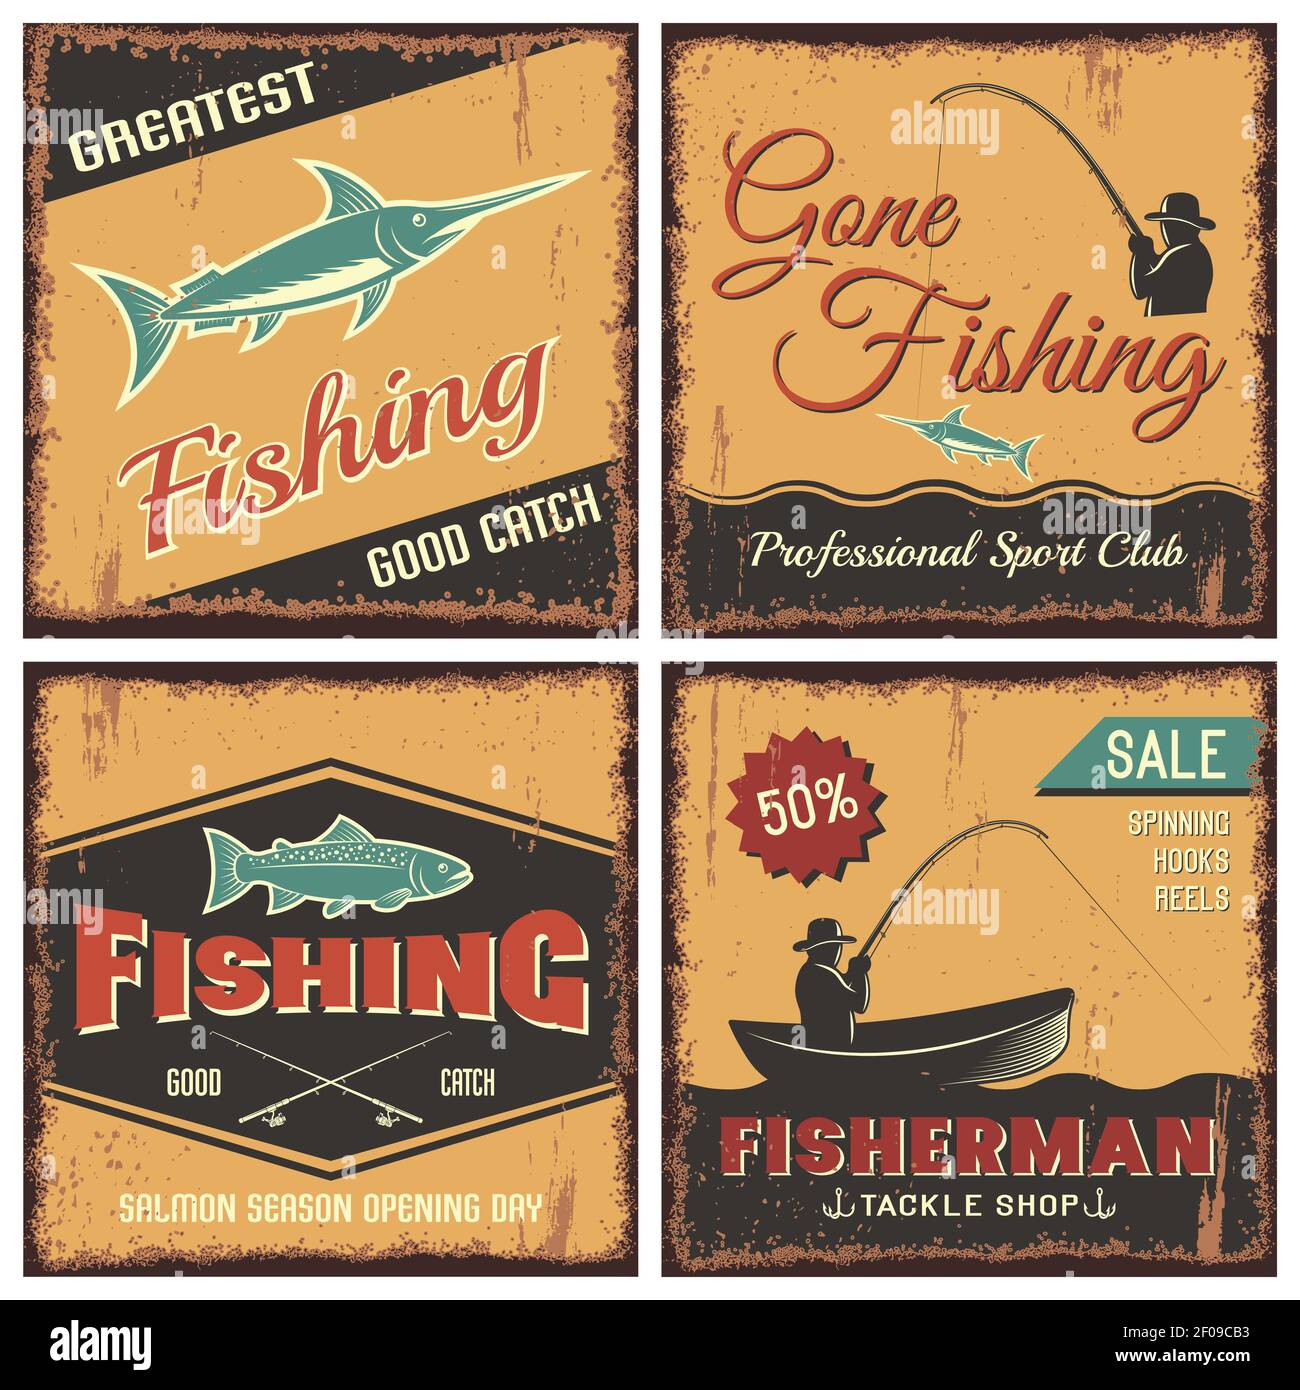 Fishing vintage style concept with man in hat boat rod salmon swordfish and inscriptions isolated vector illustration Stock Vector